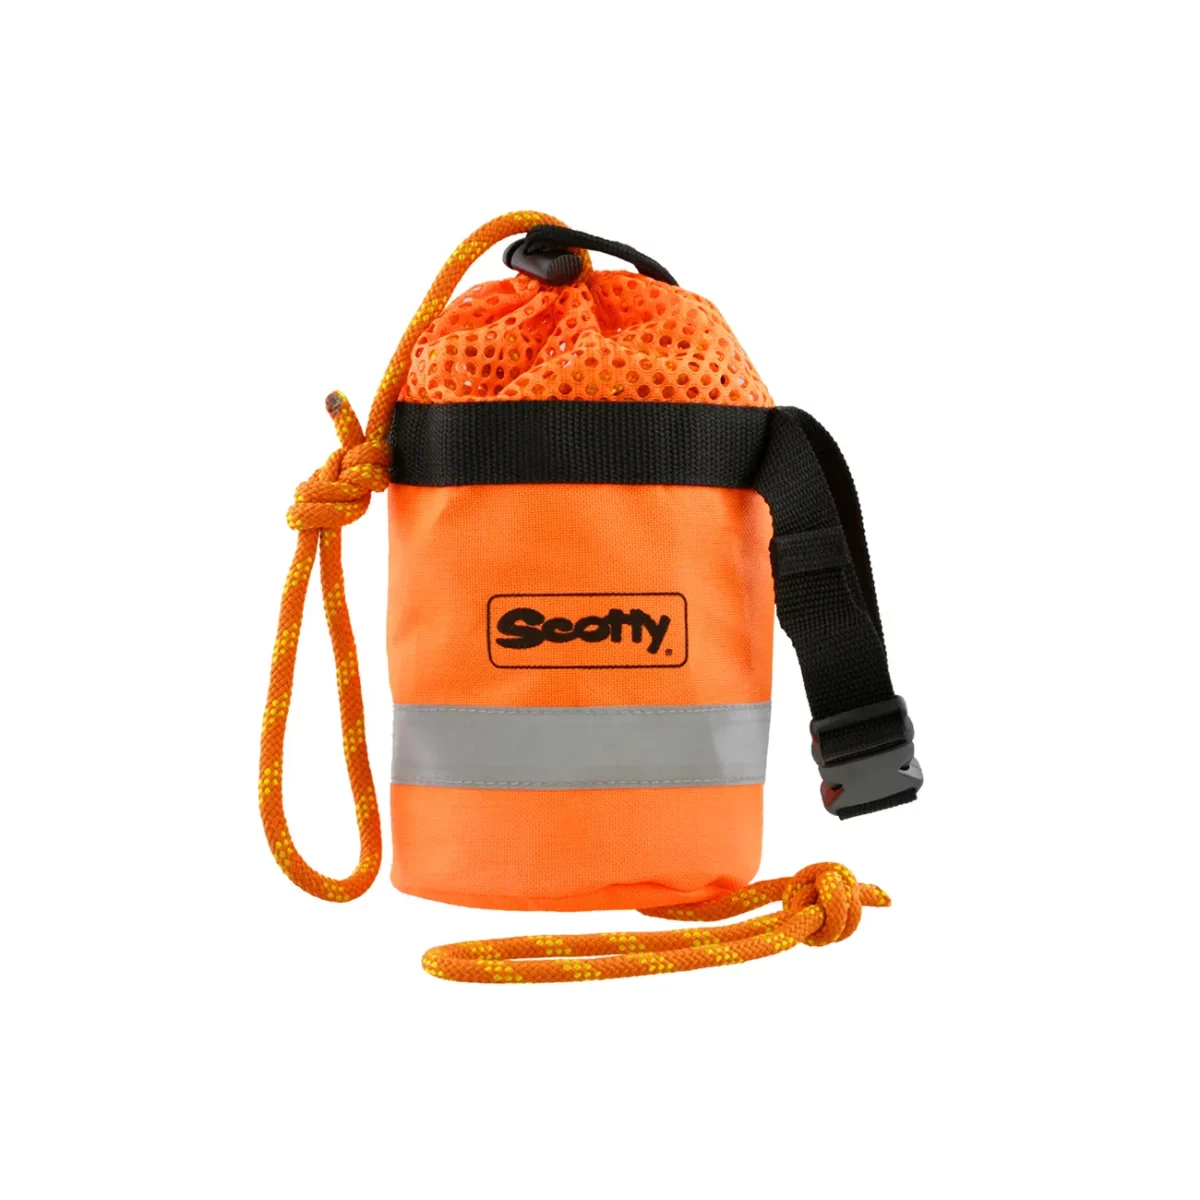 Scotty 793 Rescue Throw Bag - GPS Central